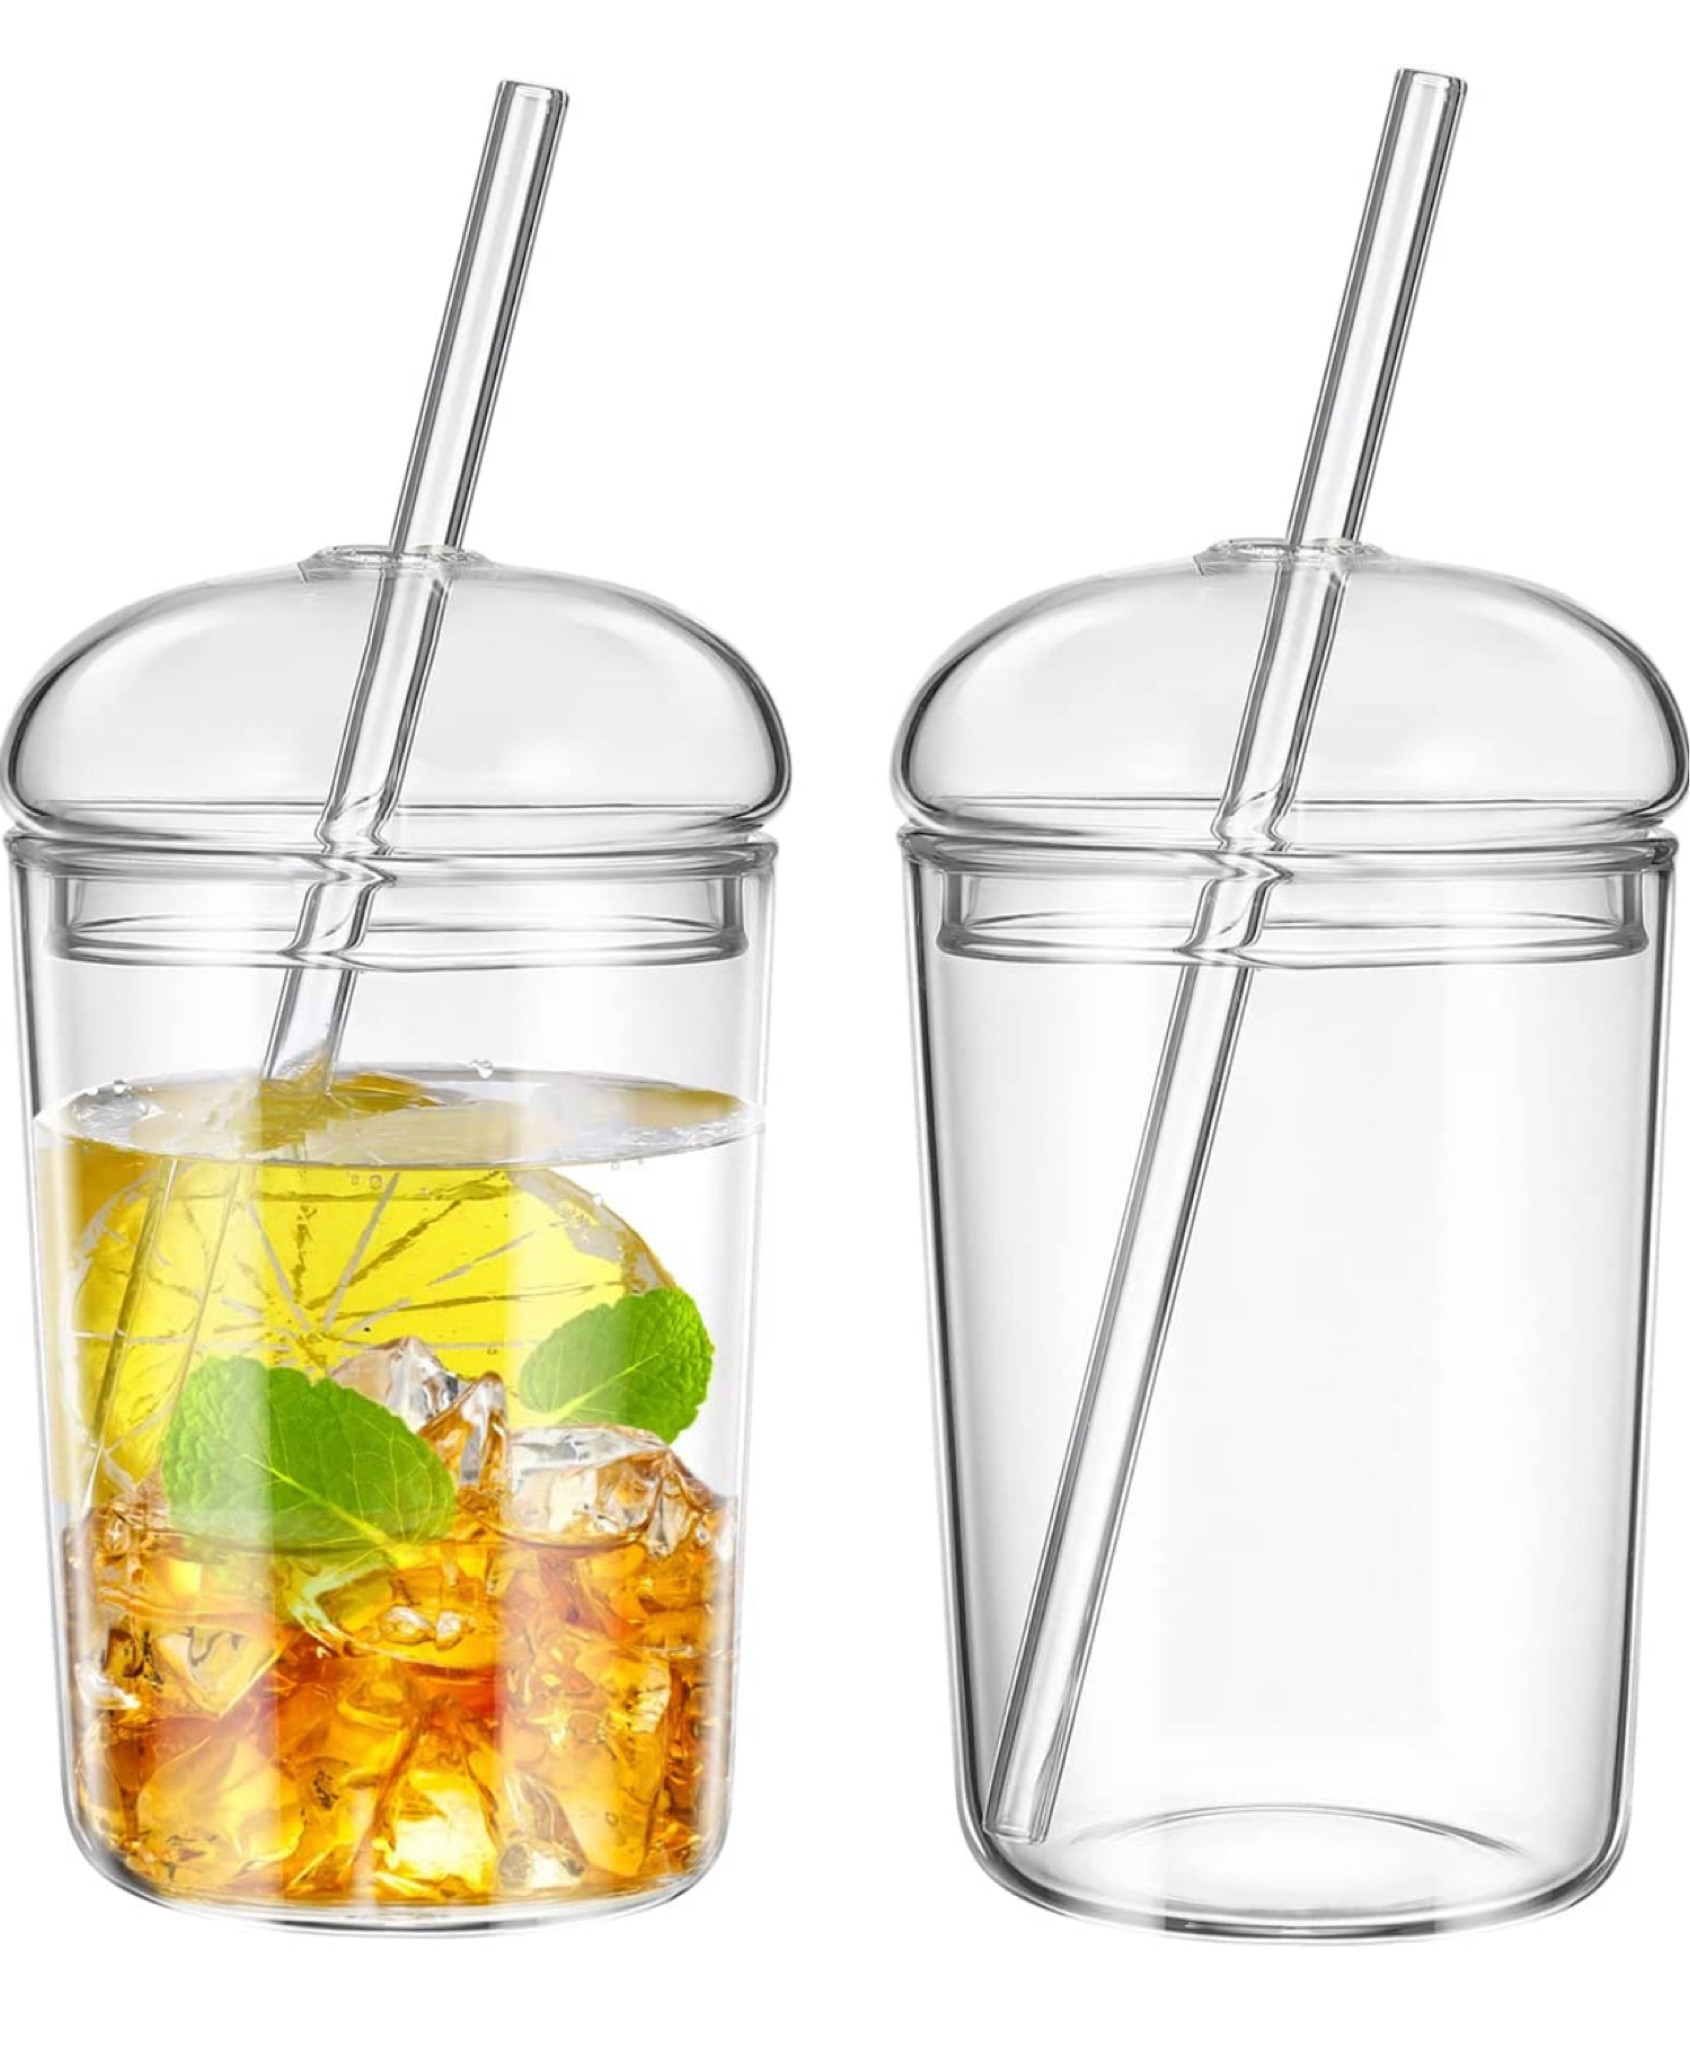 UPKOCH Glass Tumbler with Straw and Lid 16oz Glass Smoothie Cups Heat  Resistant Juice Drinking Cup C…See more UPKOCH Glass Tumbler with Straw and  Lid